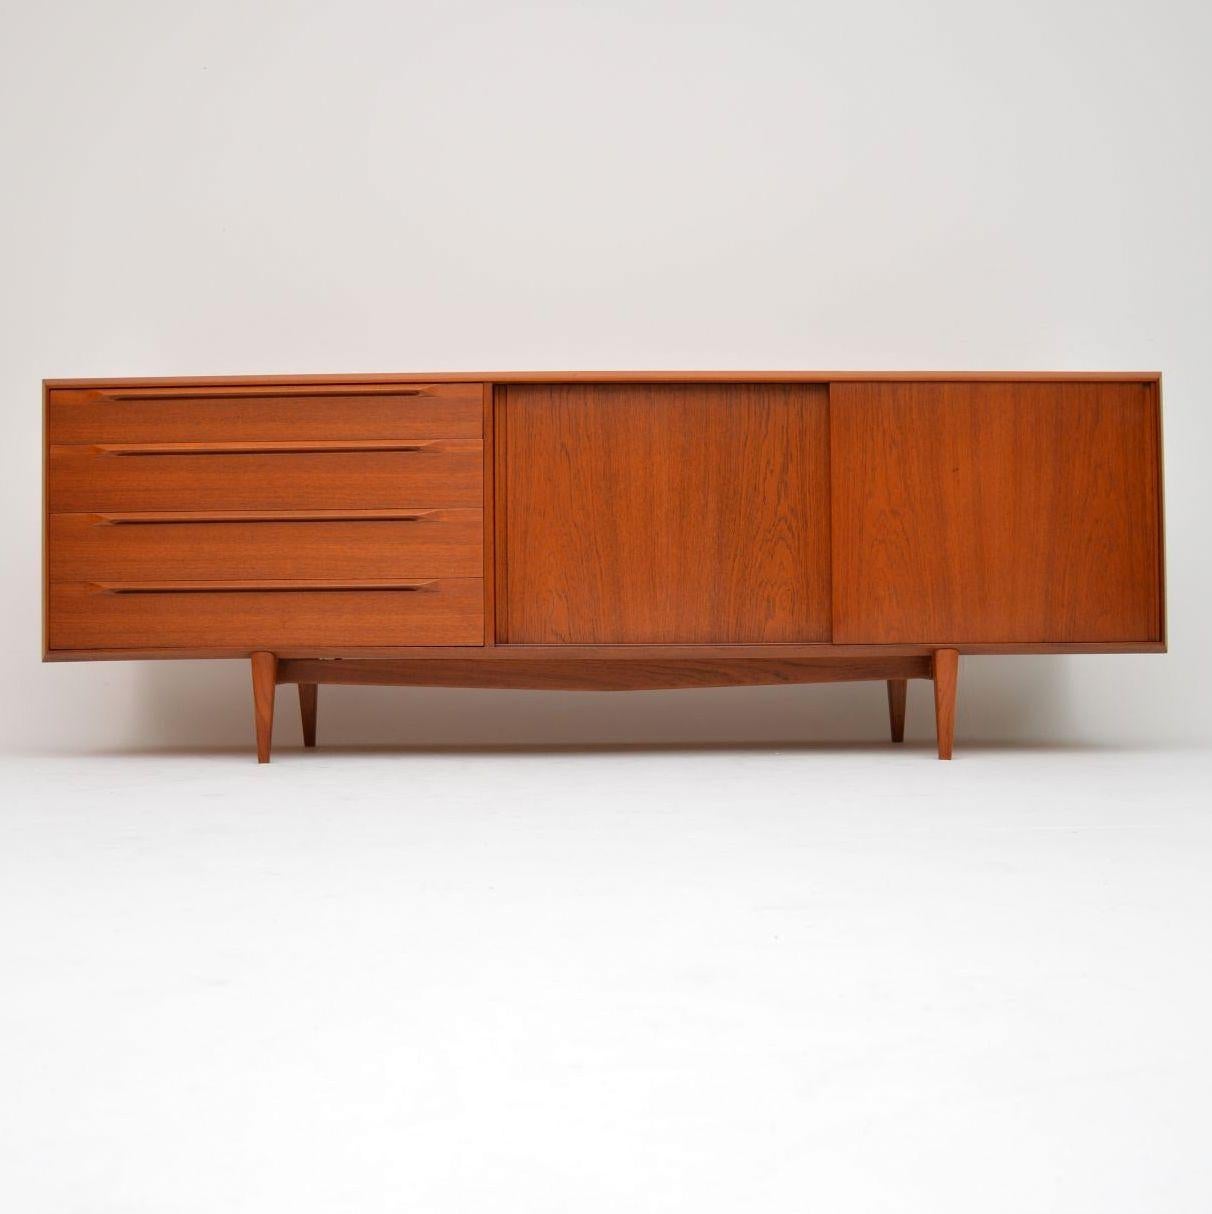 A magnificent and rare Danish sideboard in teak, this was made by Bernhard Pedersen in the 1960s. The quality is absolutely amazing, we have had this fully stripped and re-polished to a very high standard, so the condition is superb throughout. This